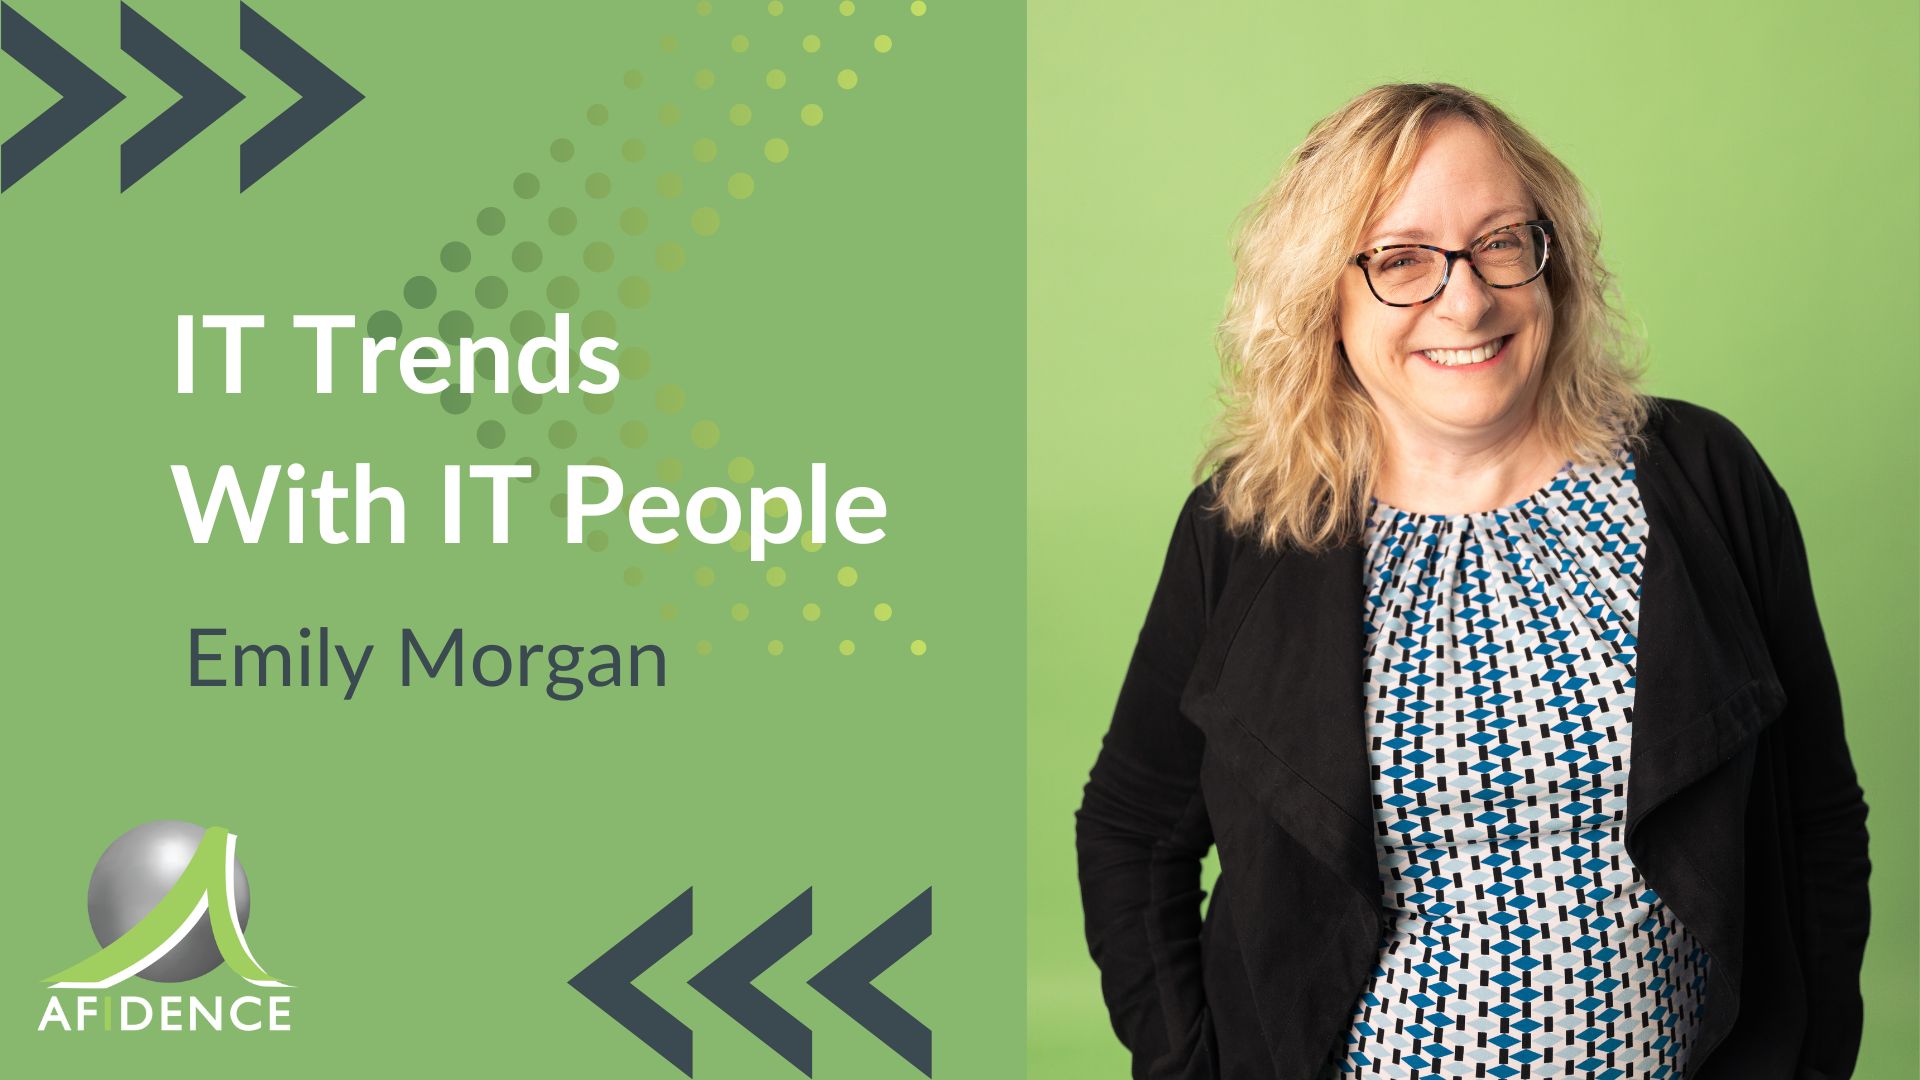 IT Trends with IT People Emily Morgan